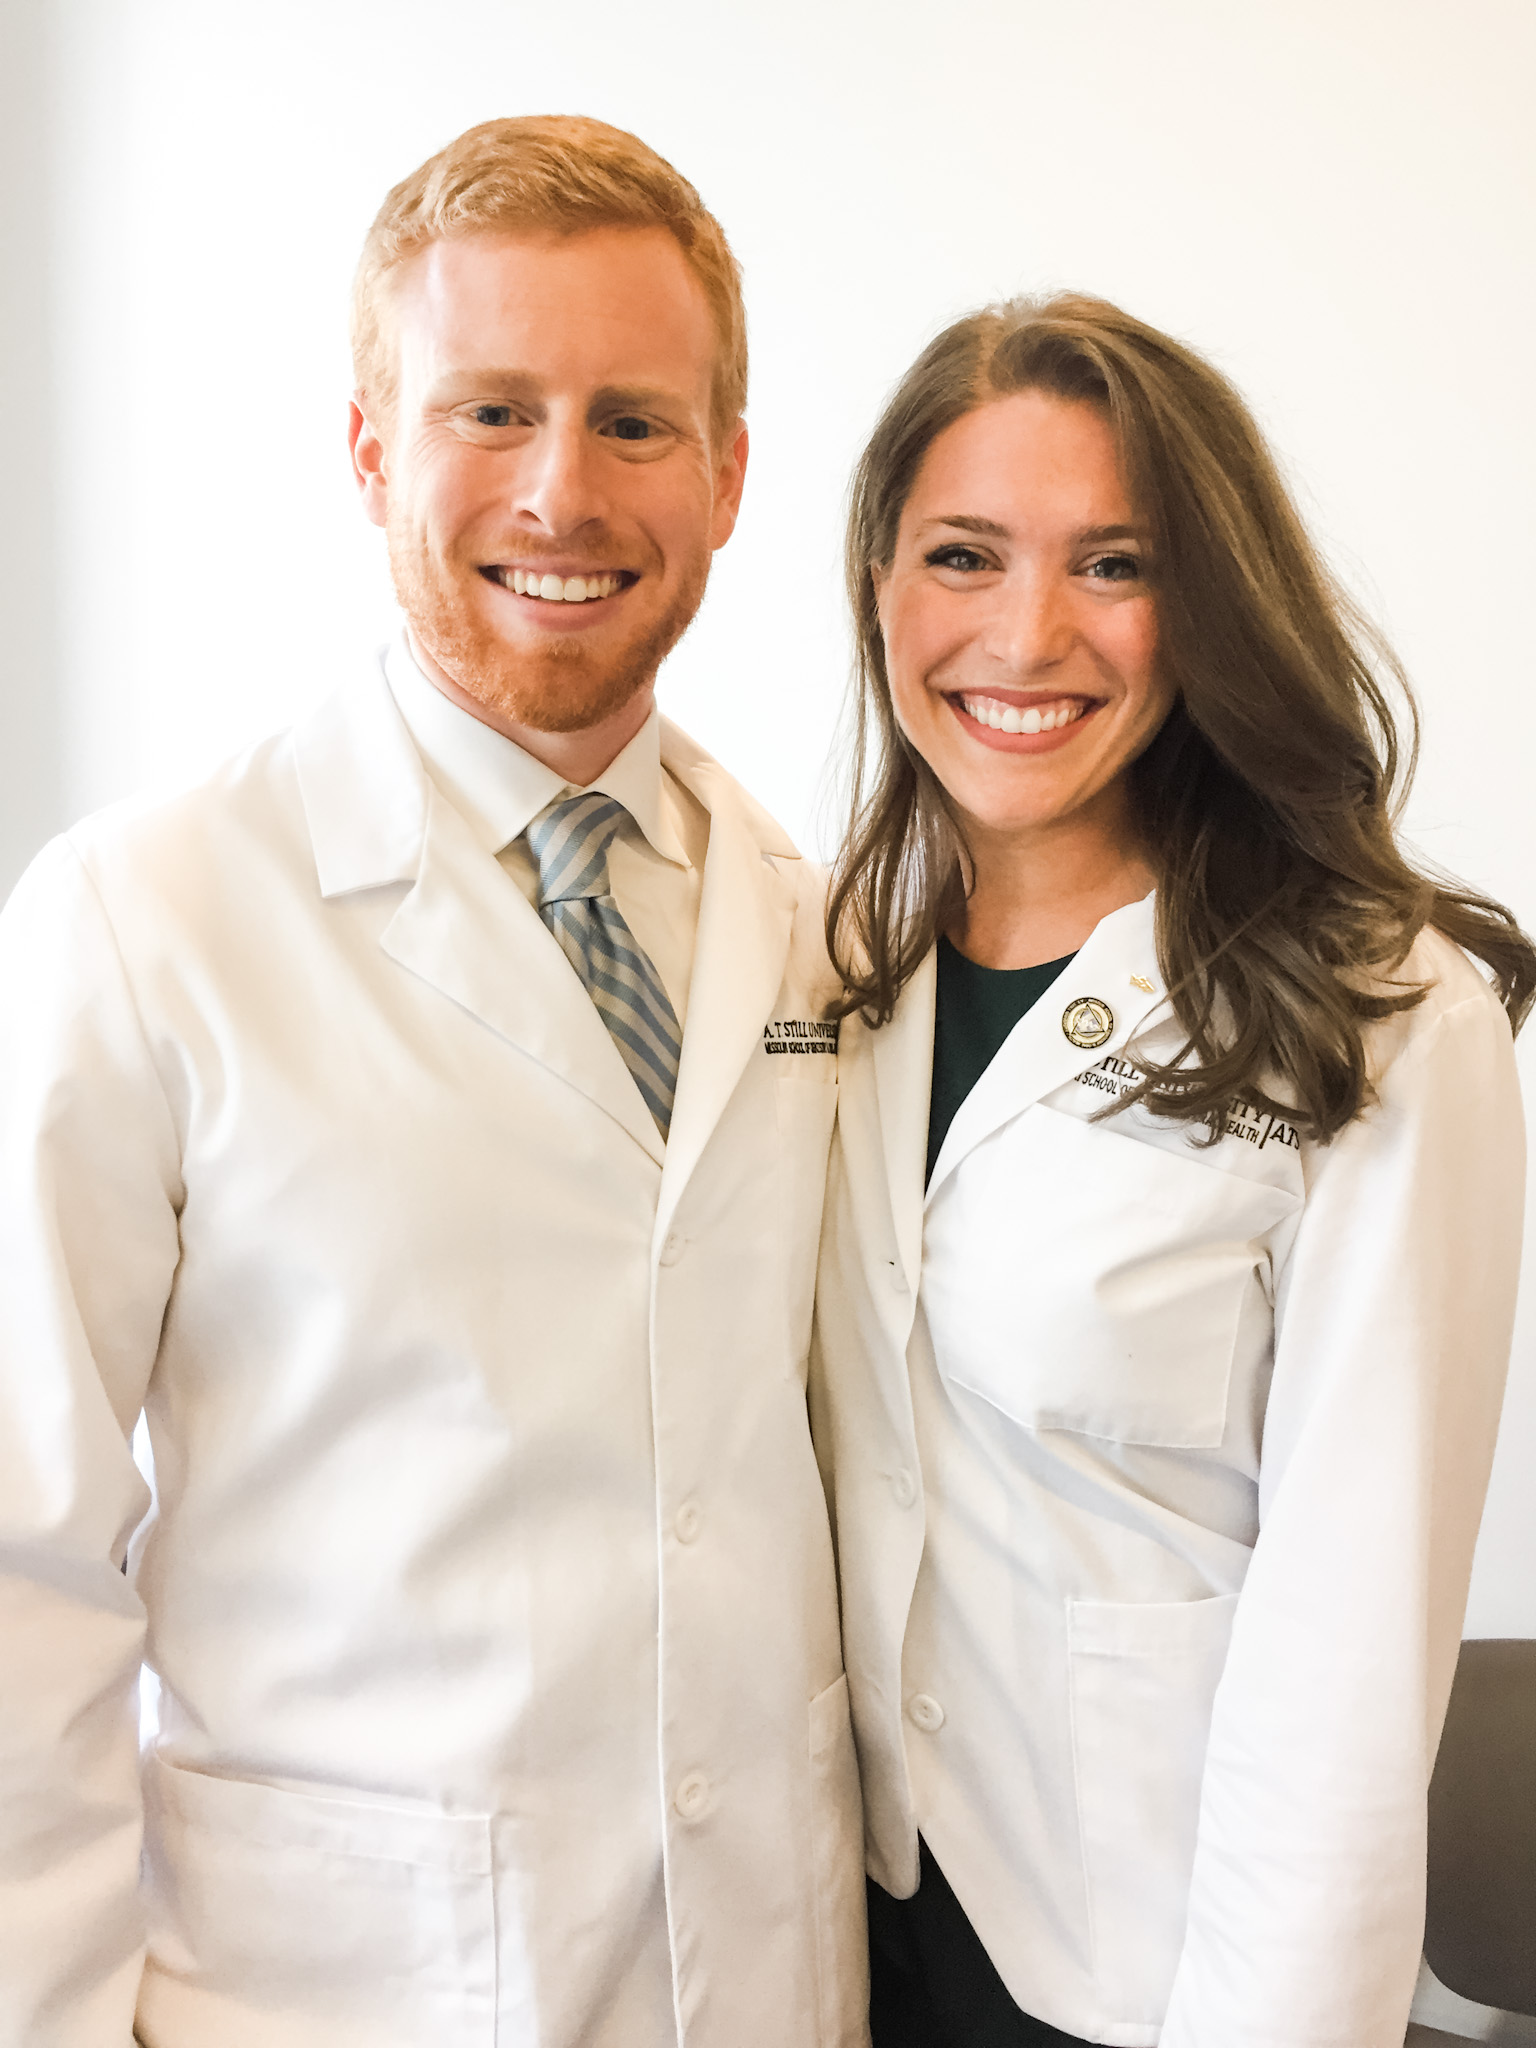 Drs. Will Vincel and Hillary Smith keep a focus on providing care to vulnerable populations.